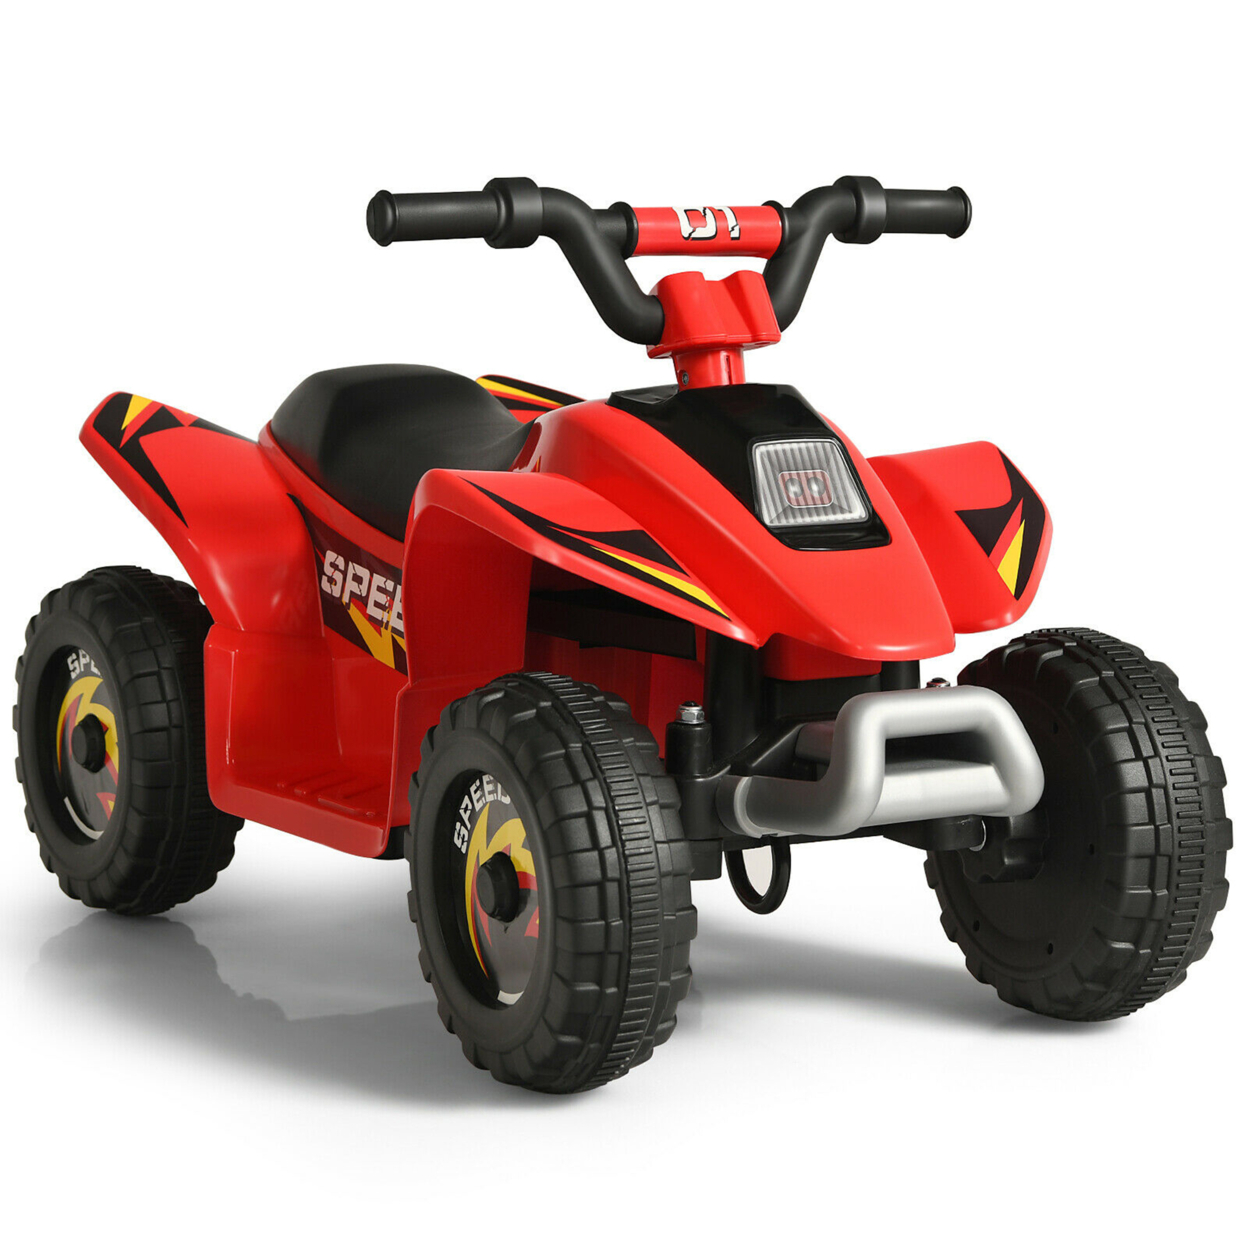 6V Kids Electric Quad ATV 4 Wheels Ride On Toy Toddlers Forward & Reverse - Red